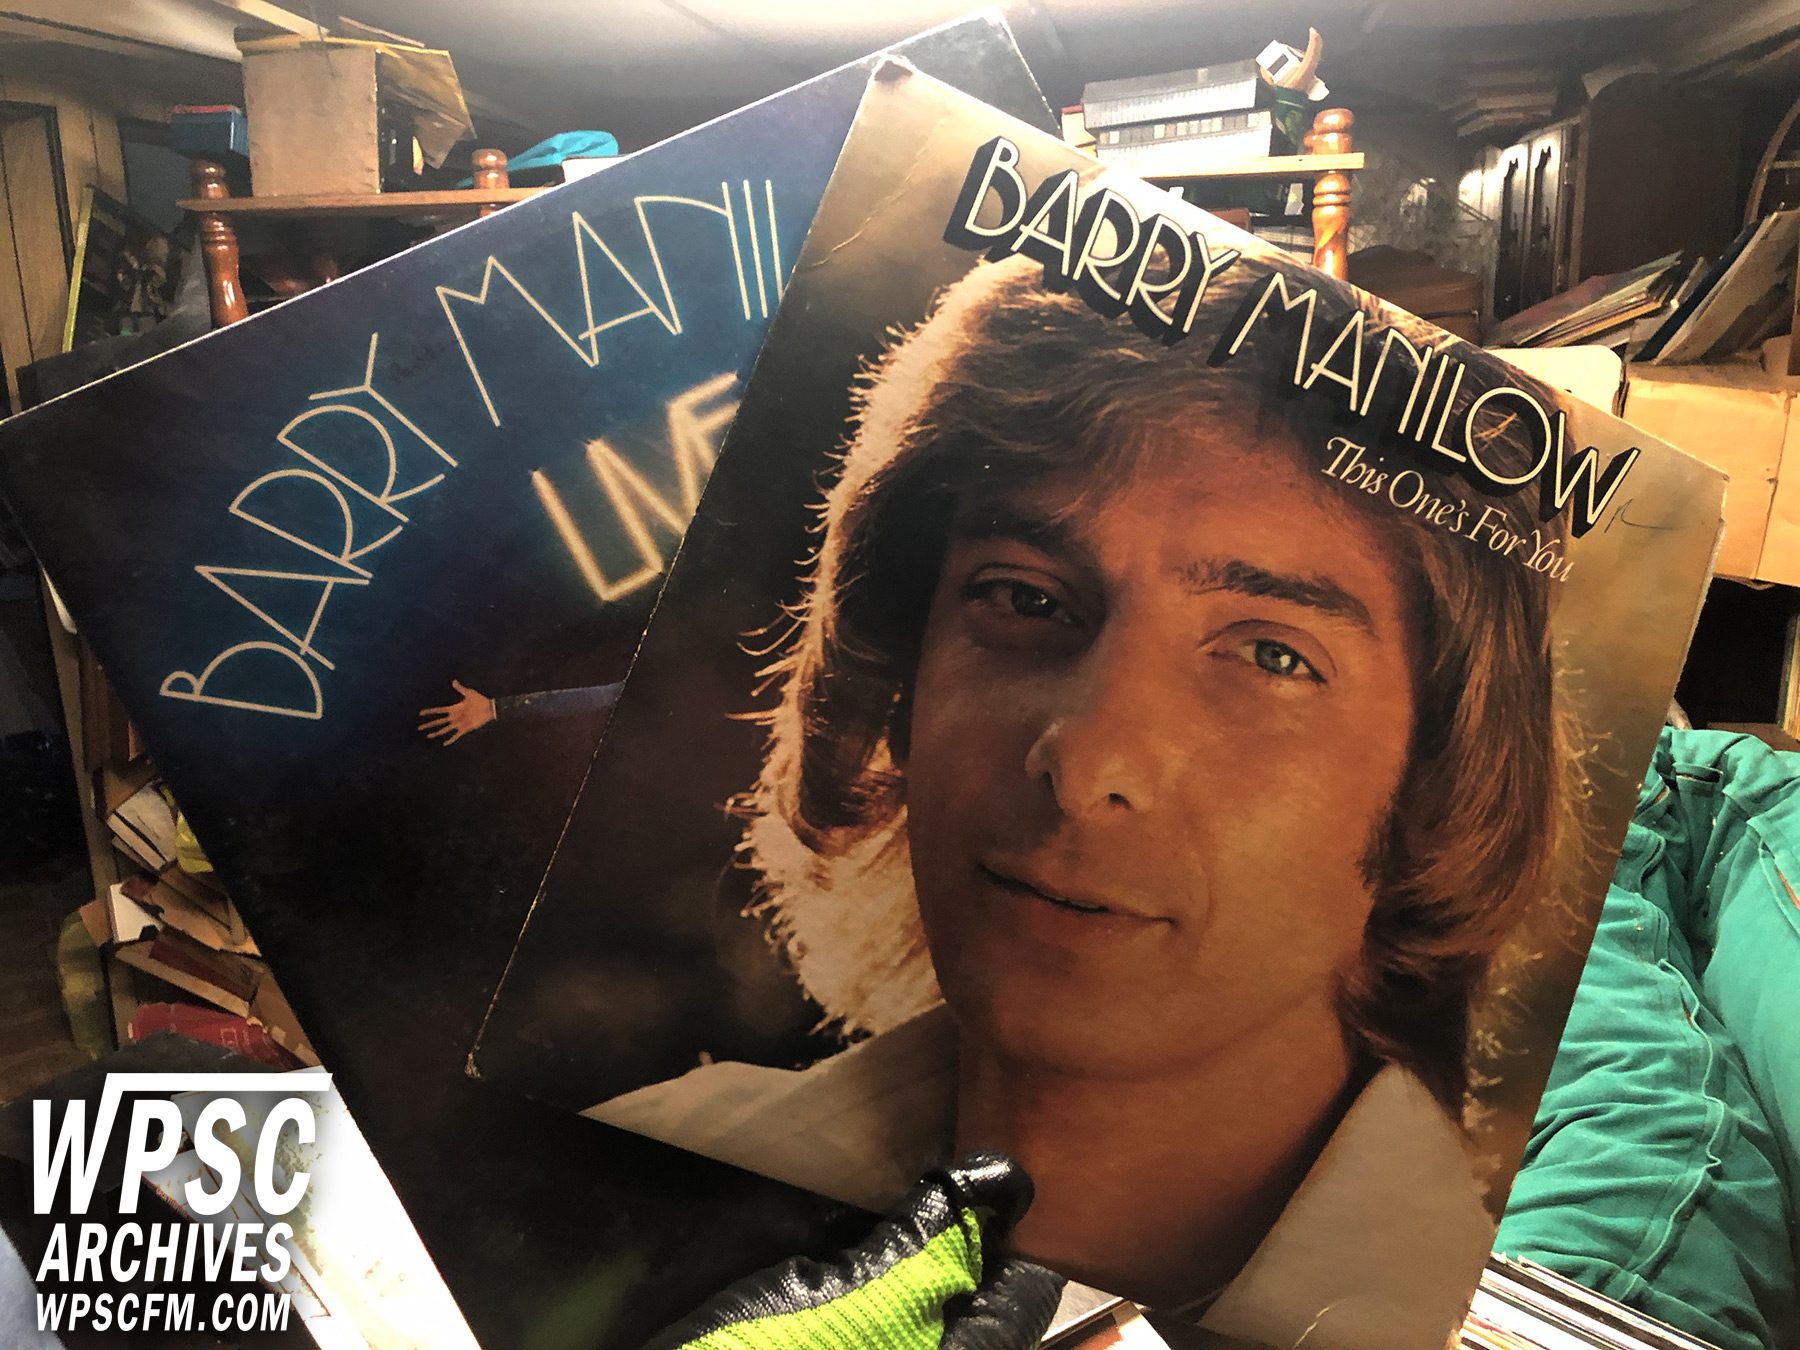 Manilow Lives!